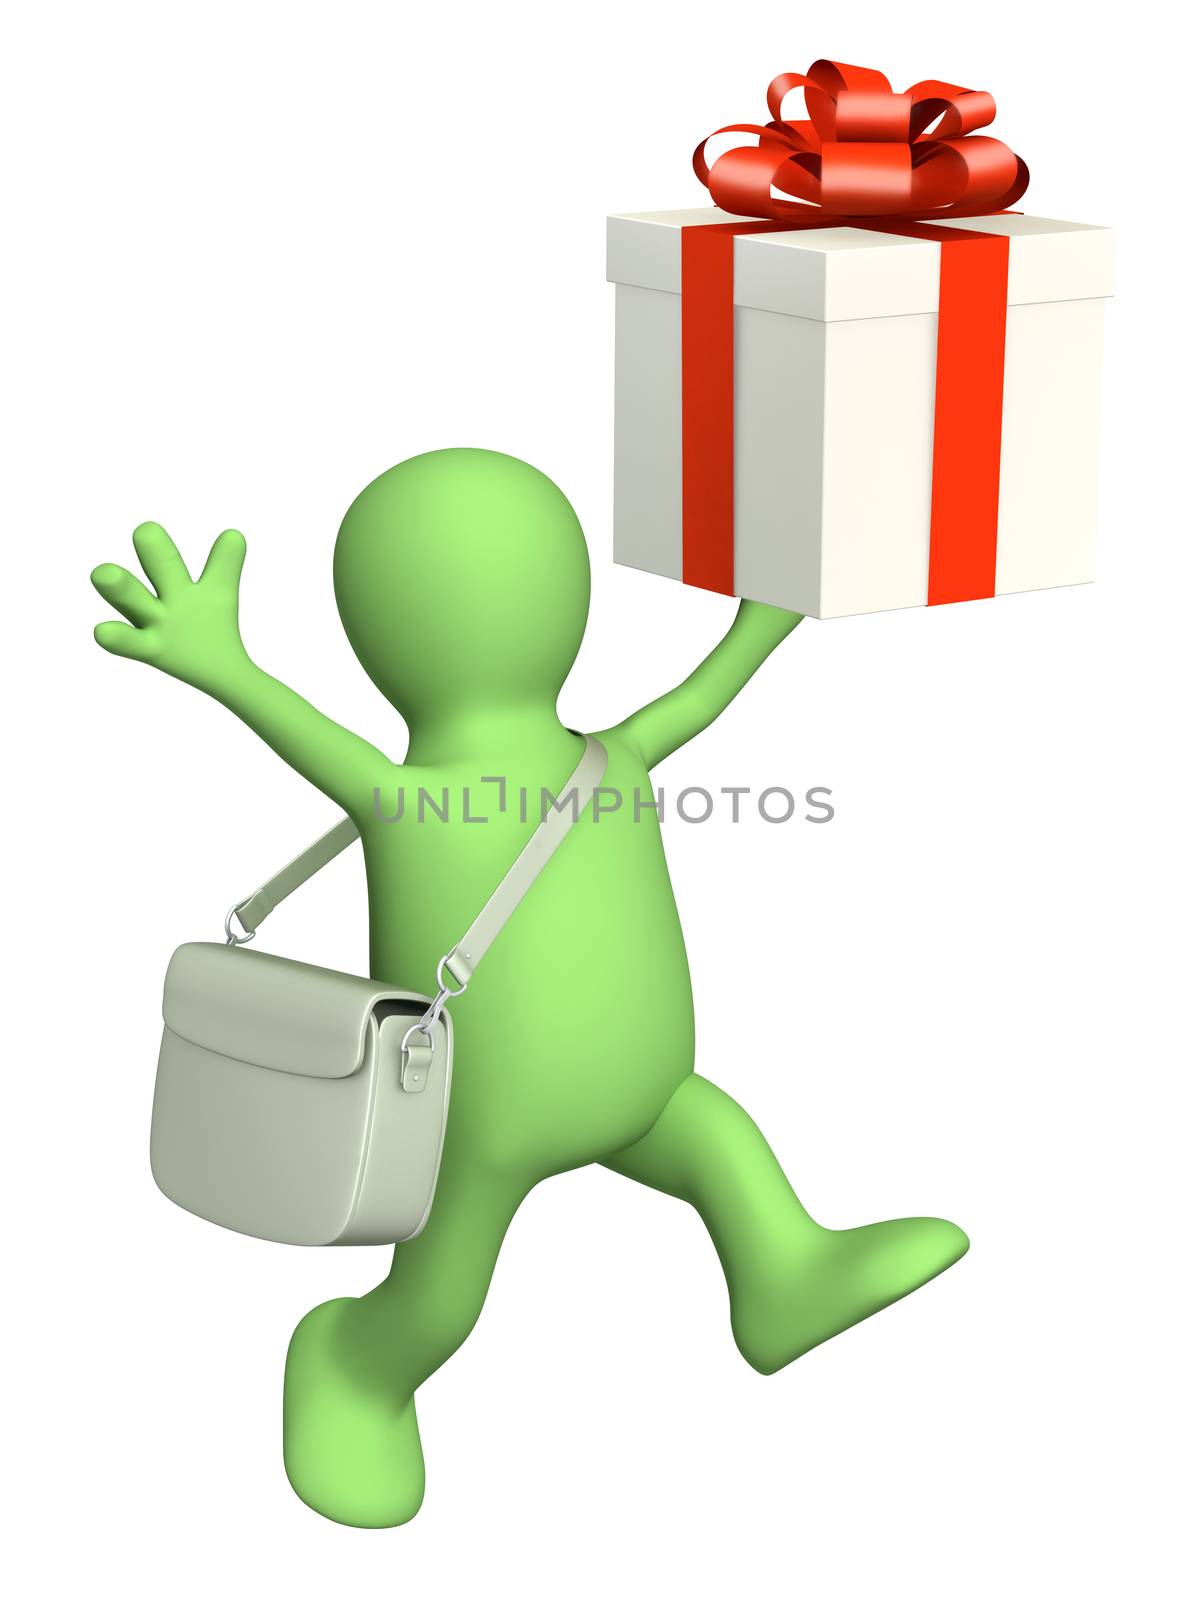 Courier with gift. Isolated over white